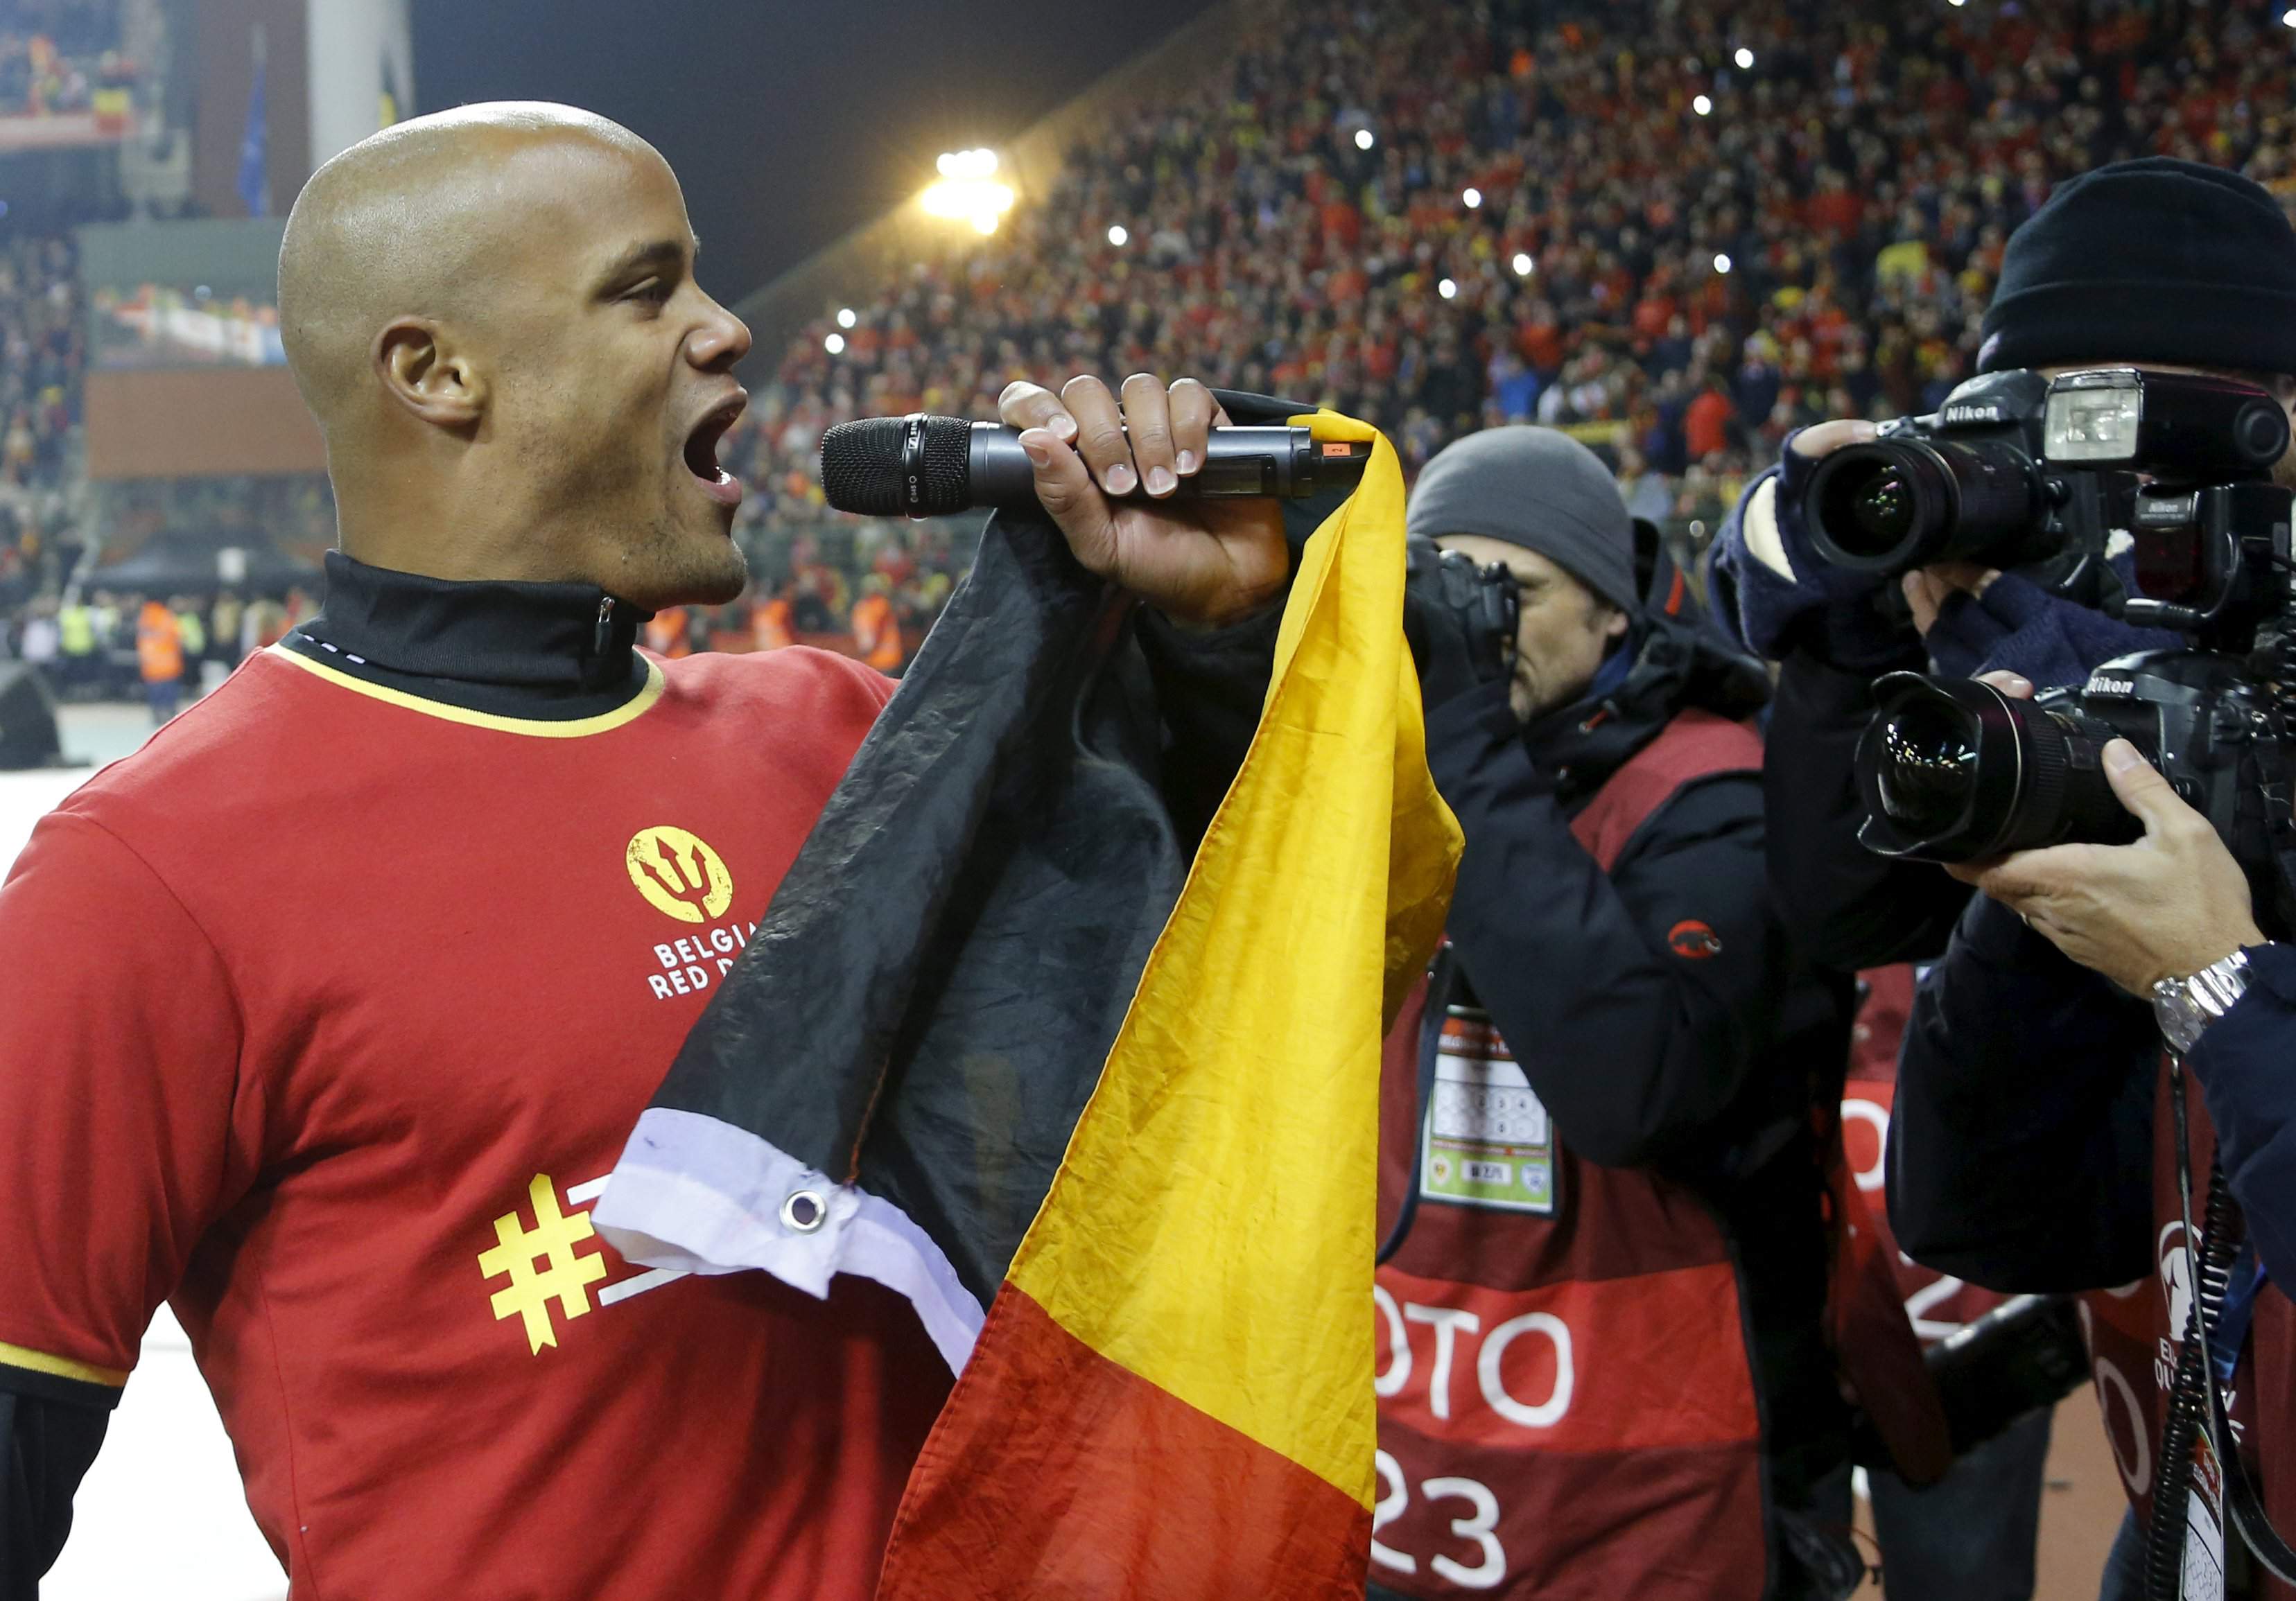 Belgium's Vincent Kompany celebrates after winning against Israel during their Euro 2016 group B qualifying soccer match at King Baudouin stadium in Brussels, October 13, 2015.  REUTERS/Francois Lenoir